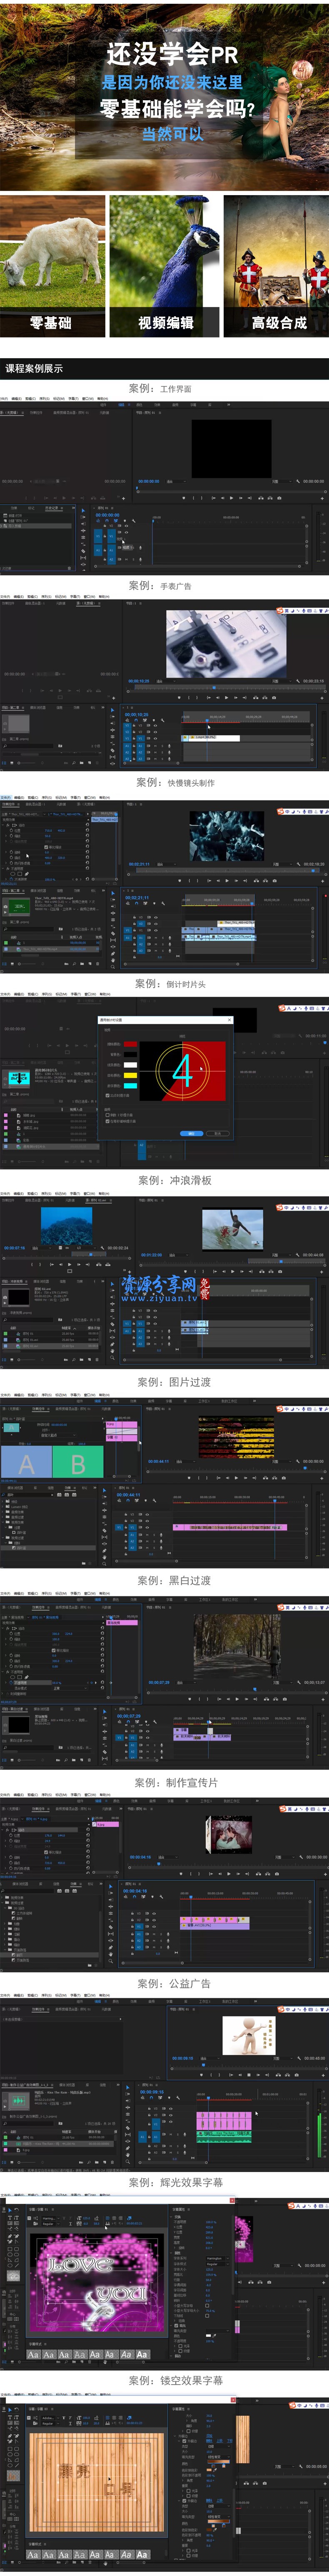 After Effects AE 视频教程大集合